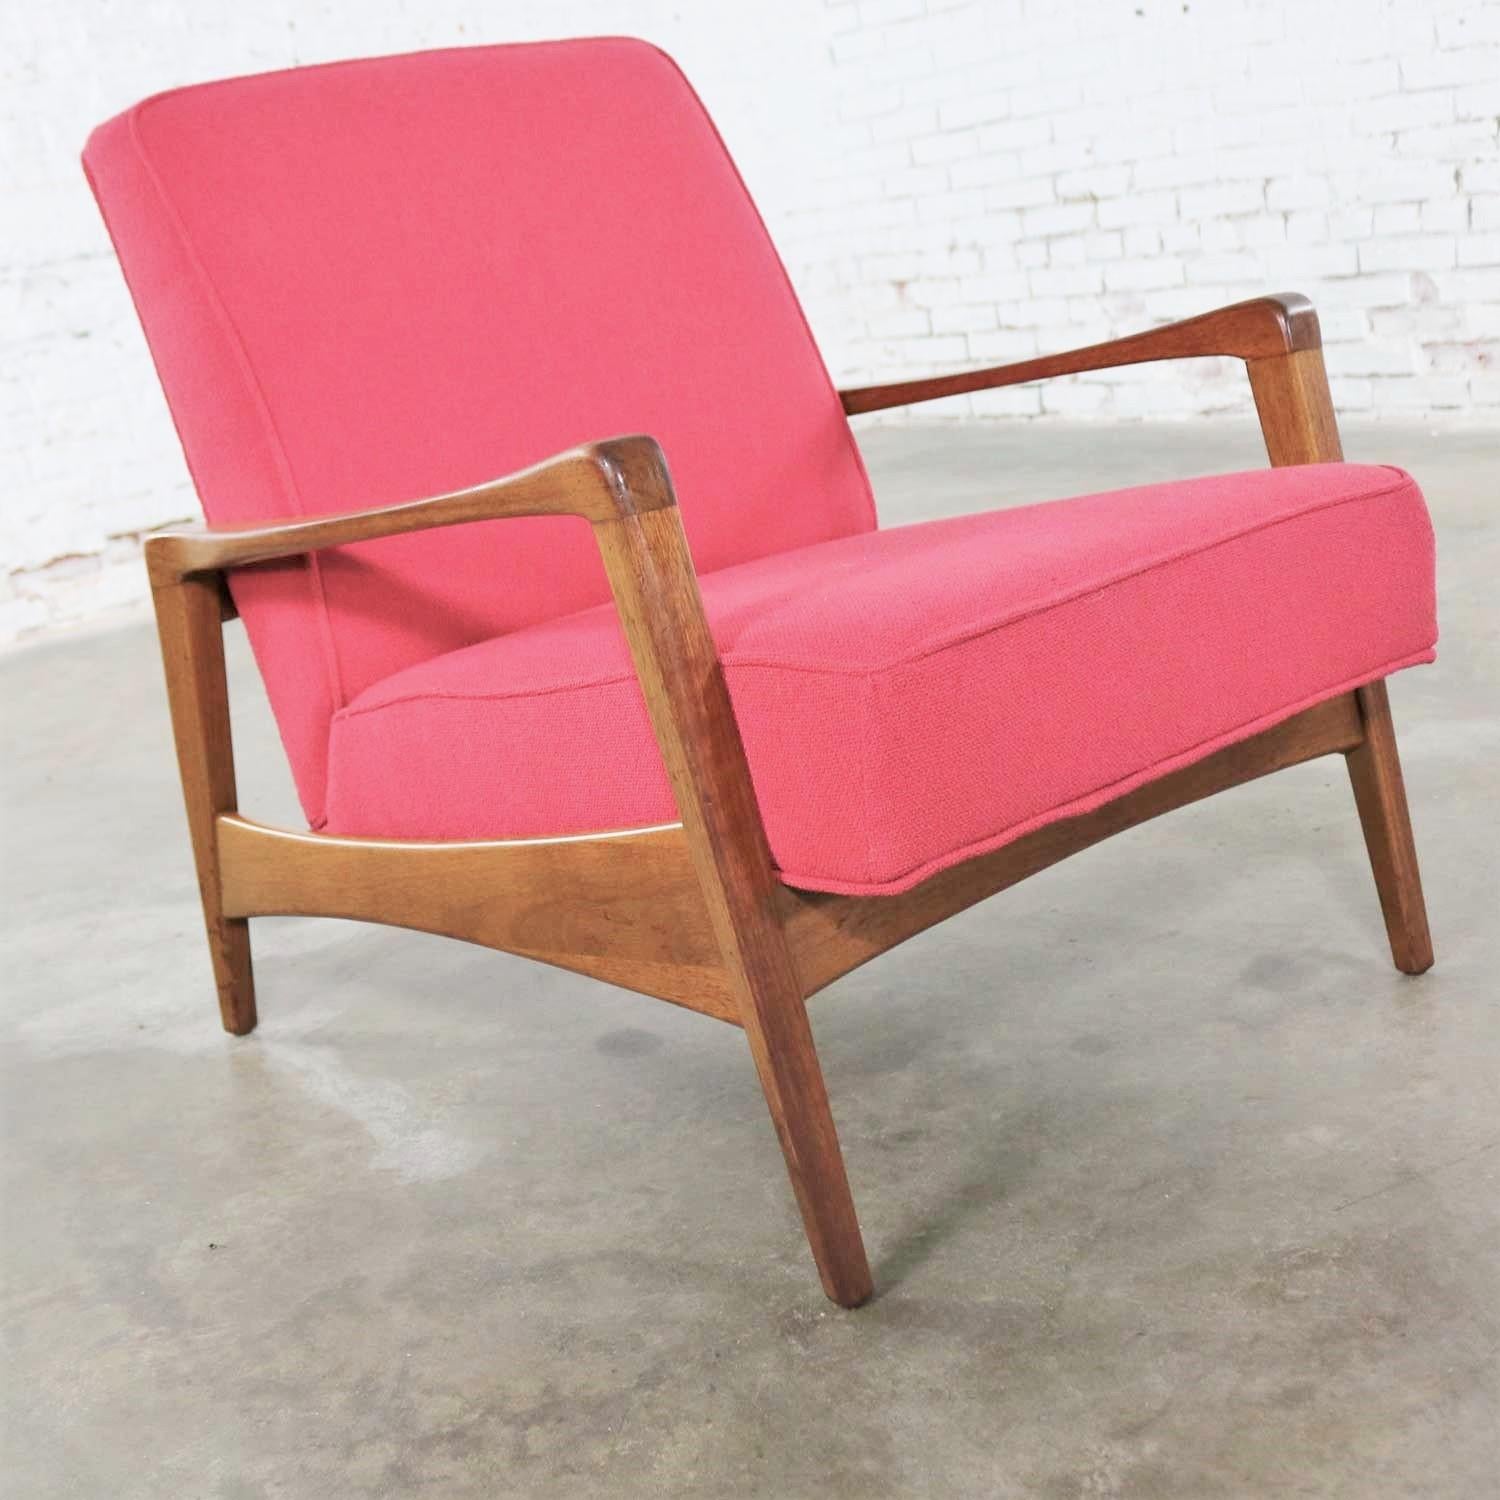 Handsome vintage MCM (a.k.a.) Mid-Century Modern 5476 lounge chair designed by George Nelson for Herman Miller. Comprised of a walnut frame and fuchsia fabric. Beautiful condition, keeping in mind that this is vintage and not new so will have signs